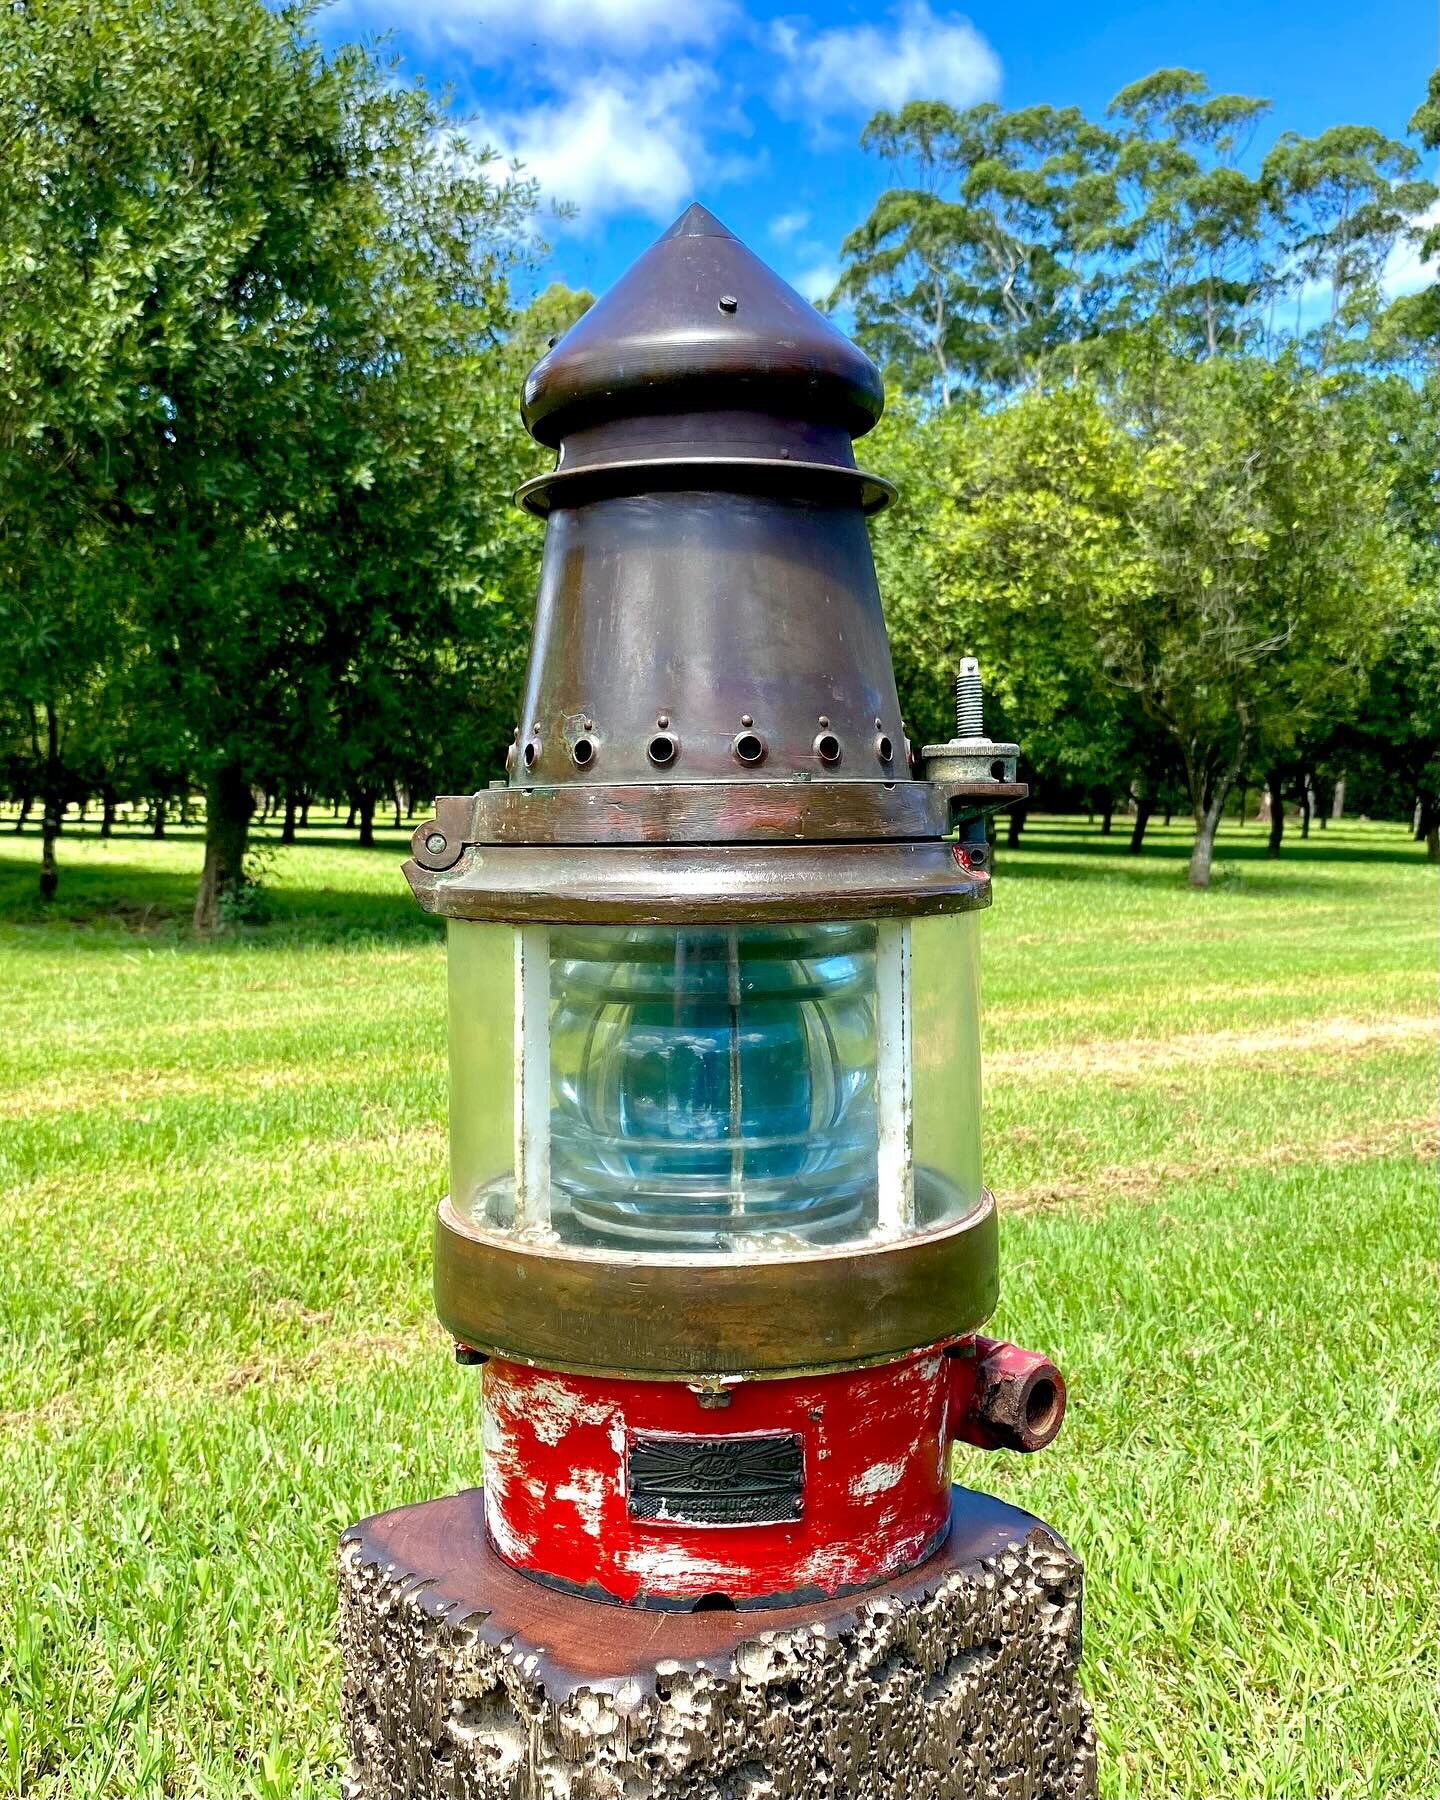 AGA Channel Beacon Marker made in Stockholm, Sweden

This AGA140 is in excellent condition - copper and brass body housing a fresnel lens&nbsp;with a starboard green lens filter. Standing at 660mm tall. 

Available now from our Northern Rivers Store.